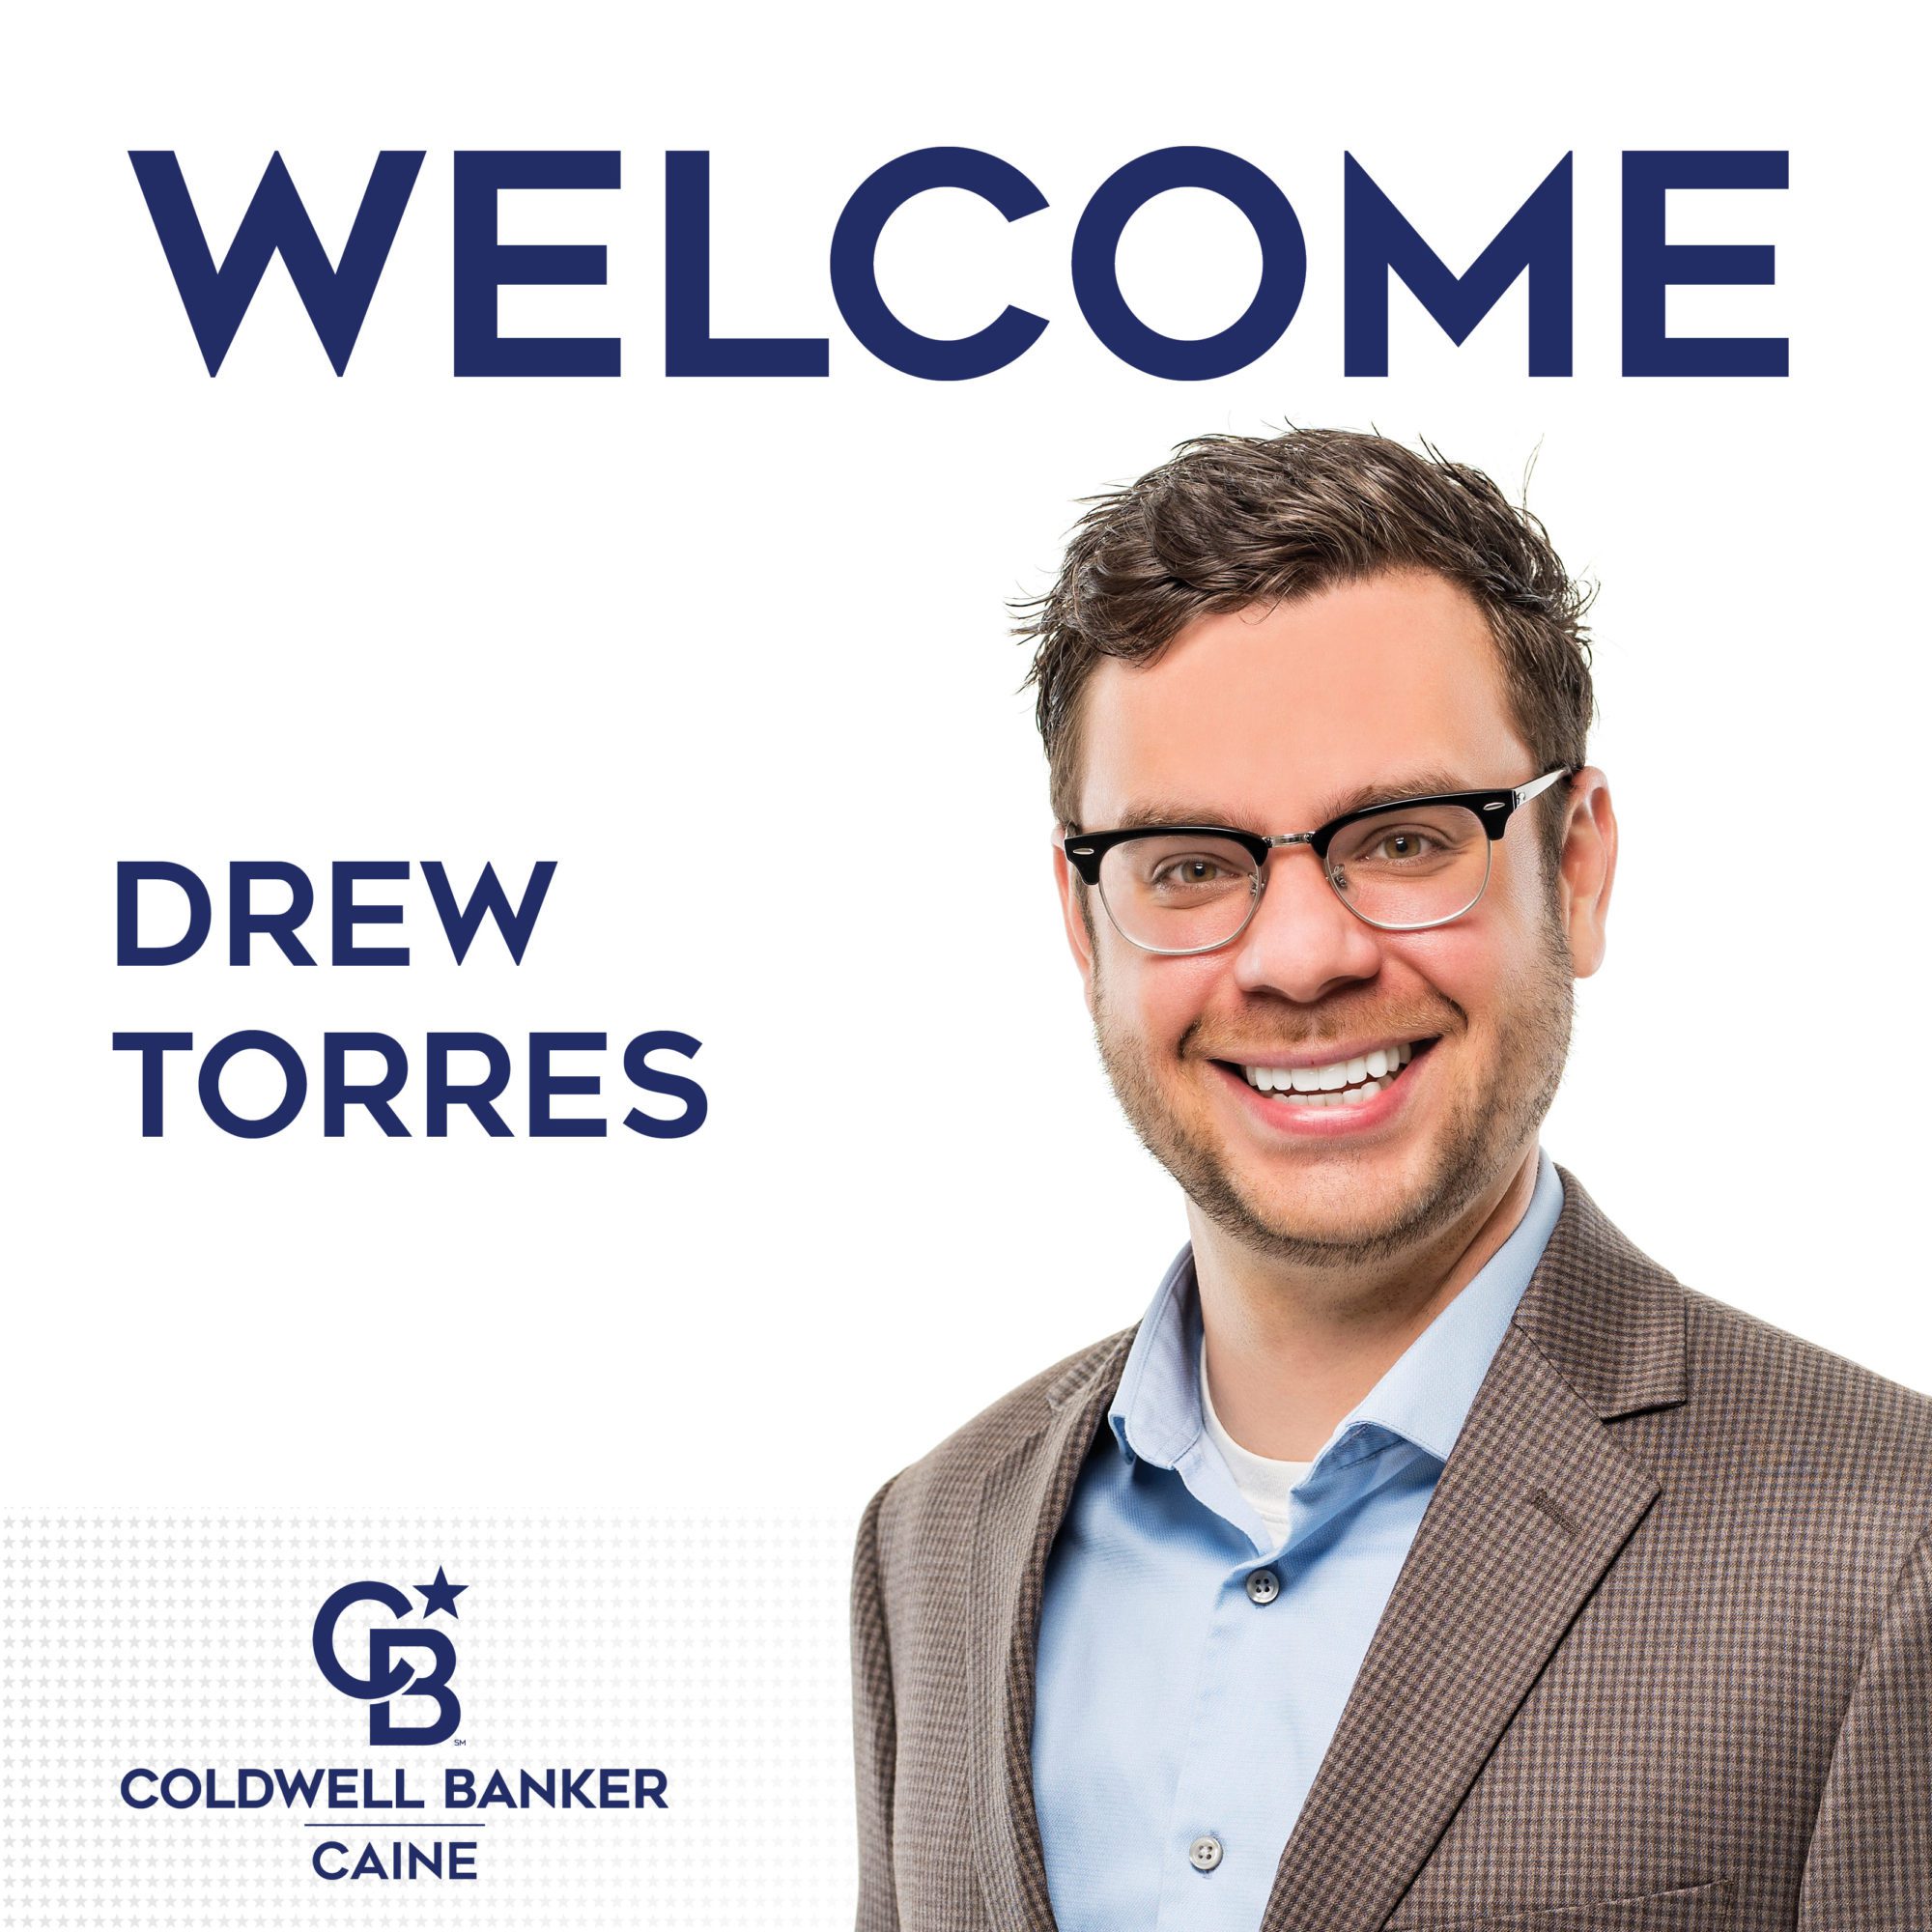 Drew Torres Joins Coldwell Banker Caine in Greenville